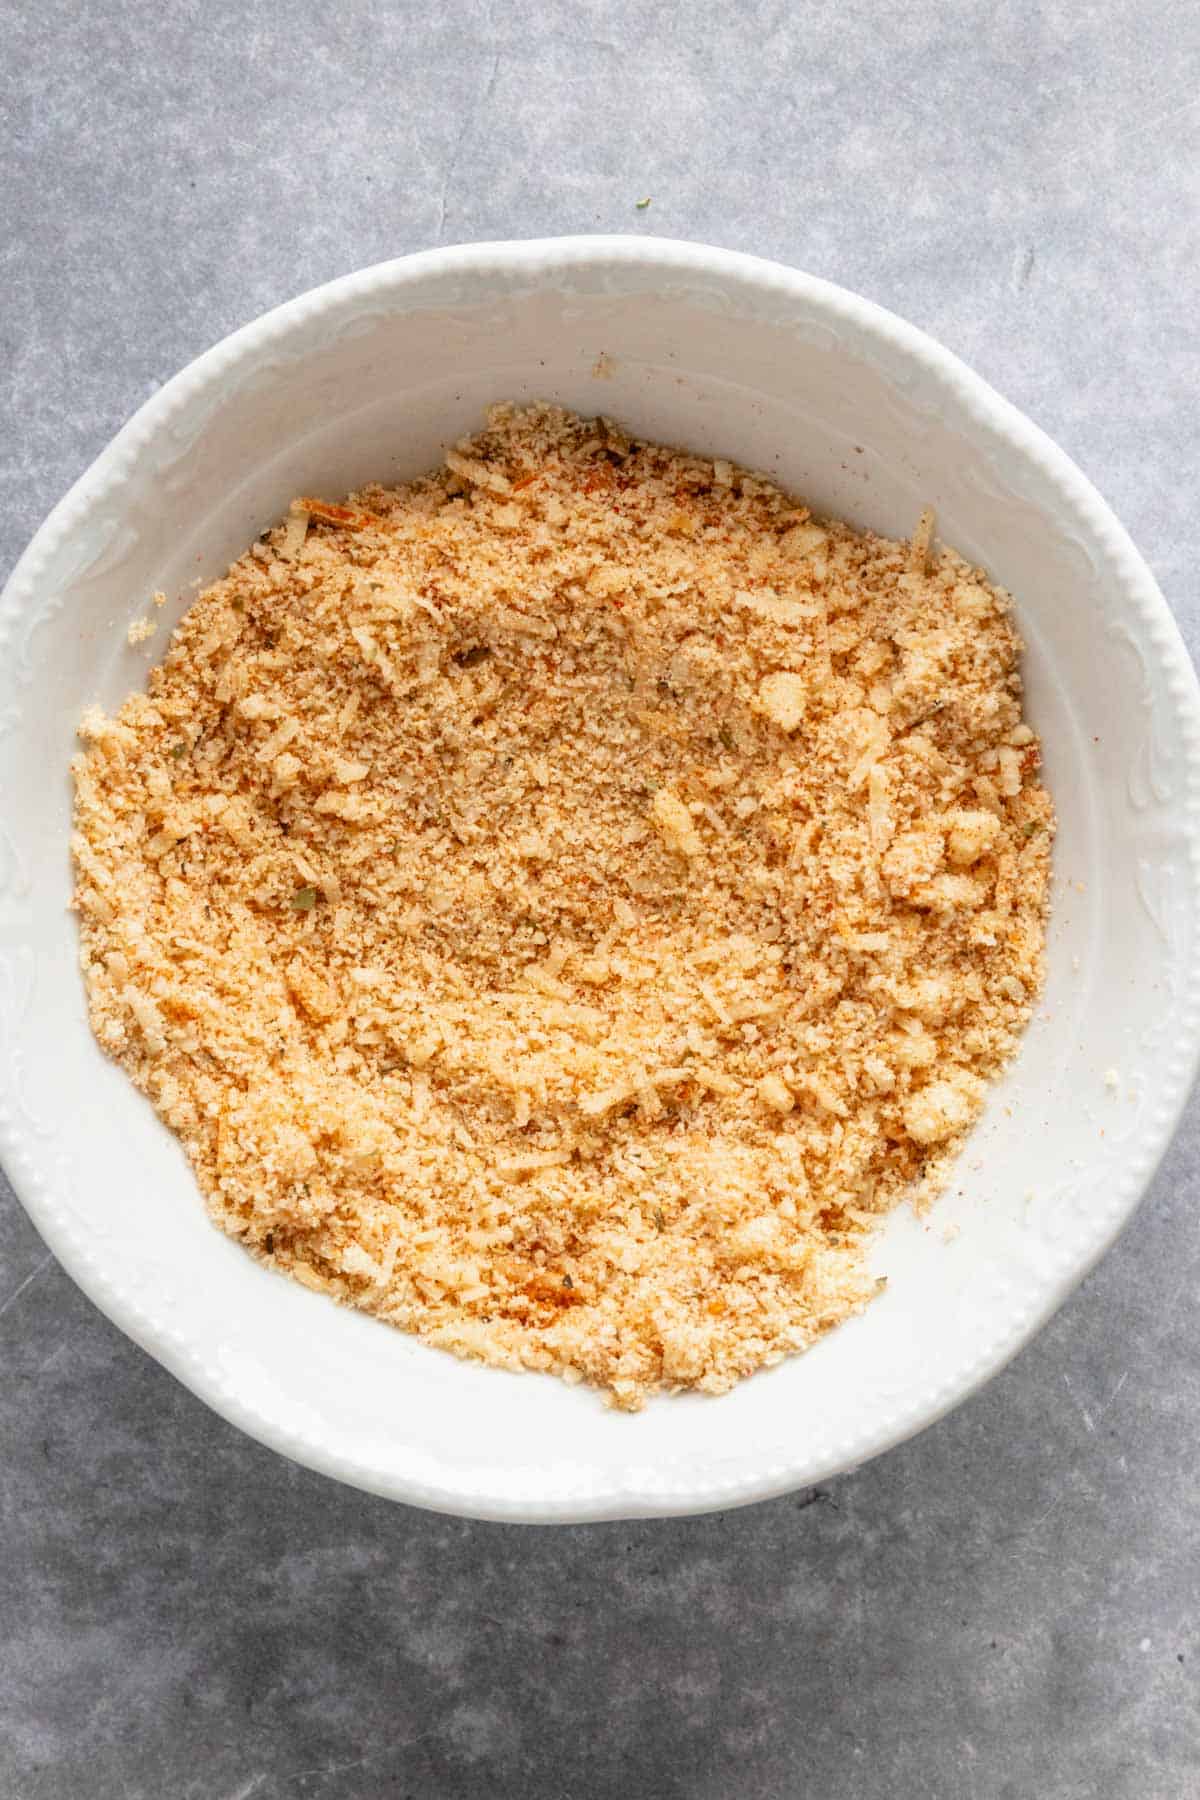 almond flour breading in a bowl.